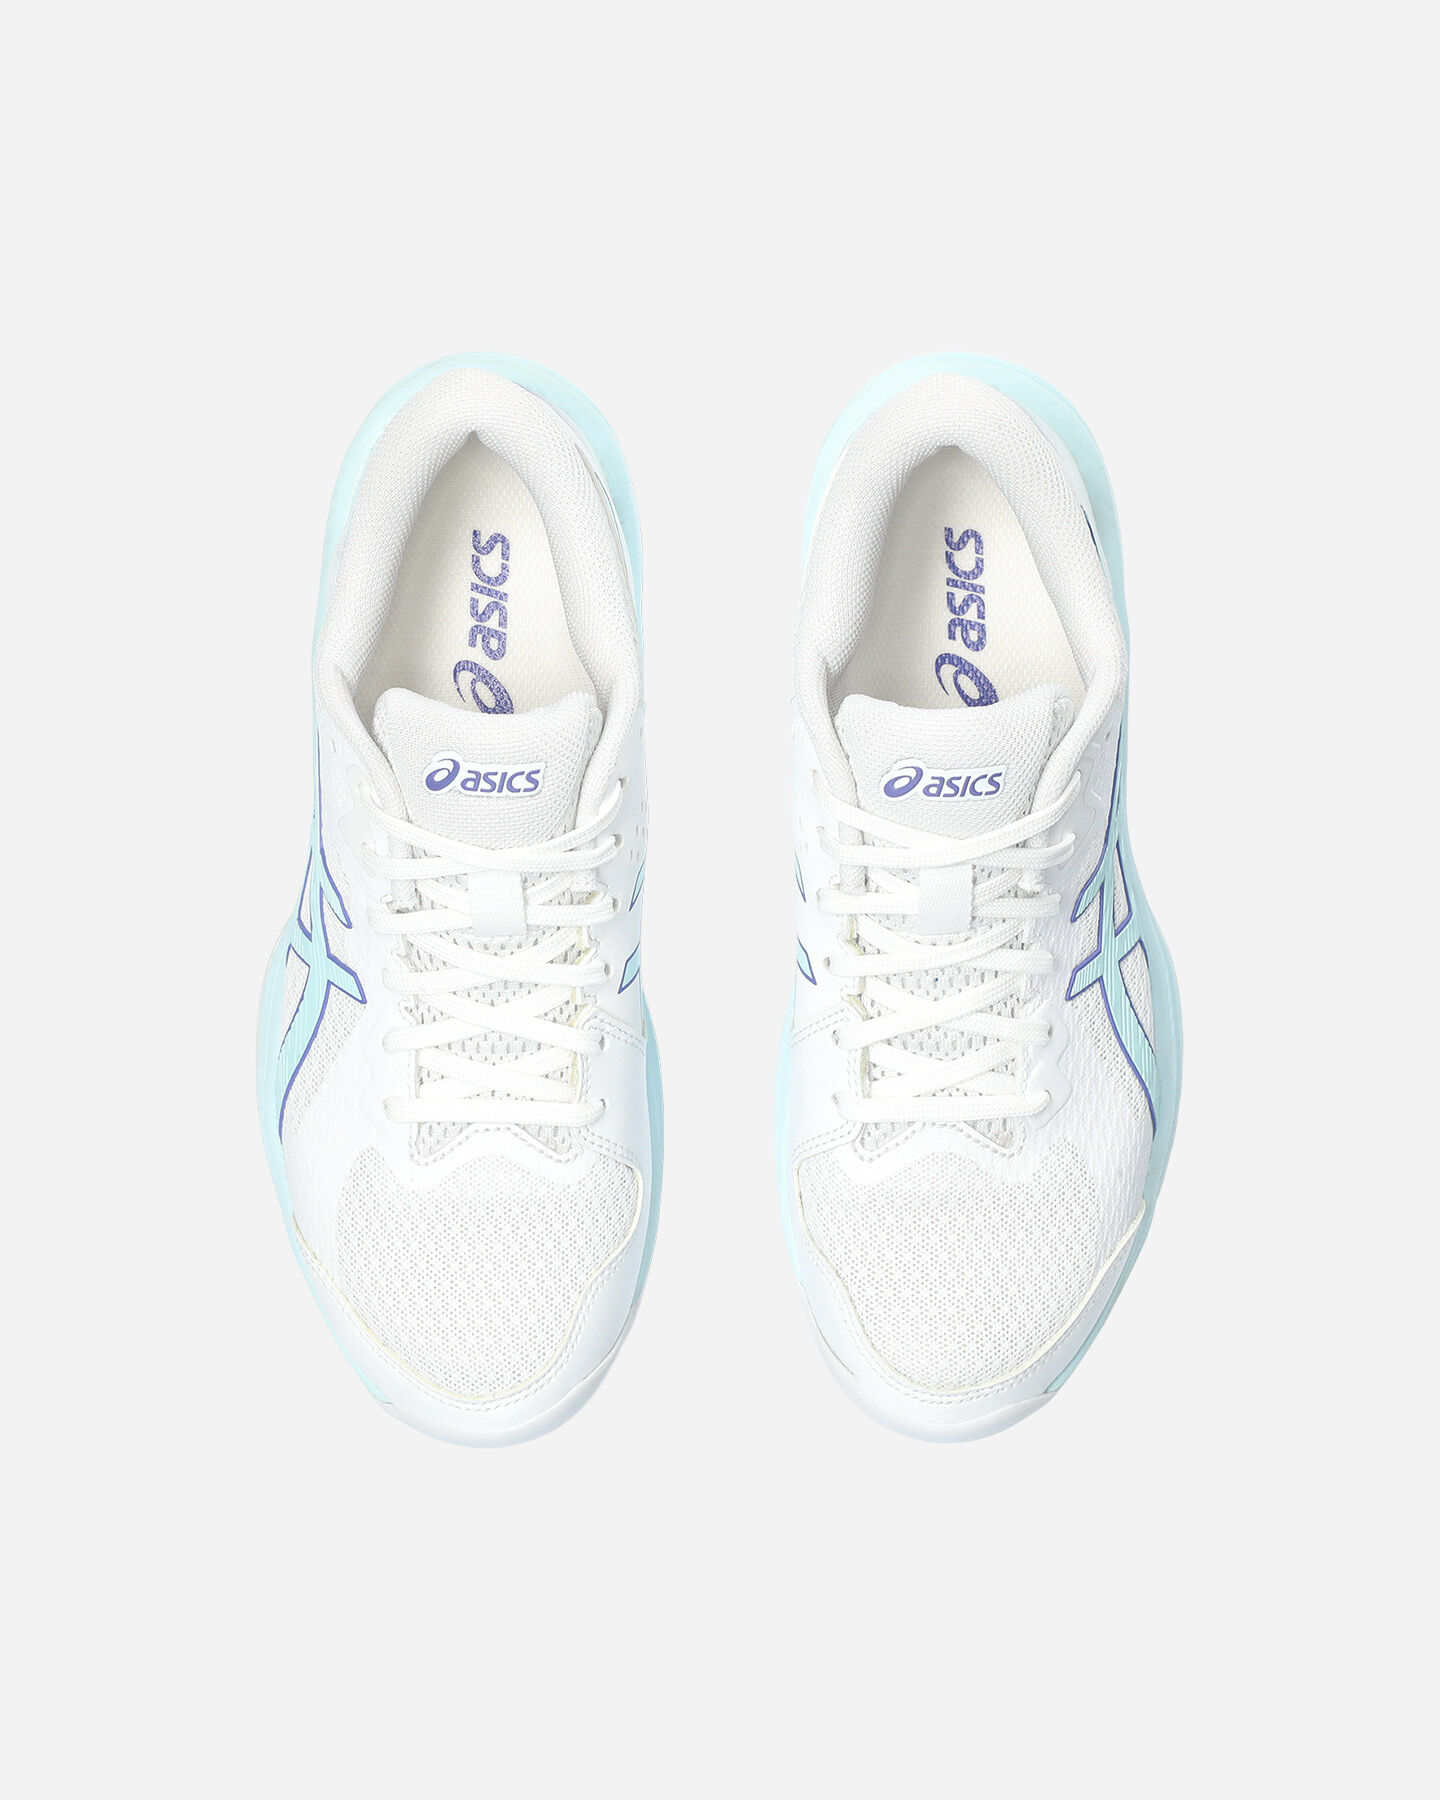  Scarpe volley ASICS BEYOND W S5585396|100|8 scatto 3